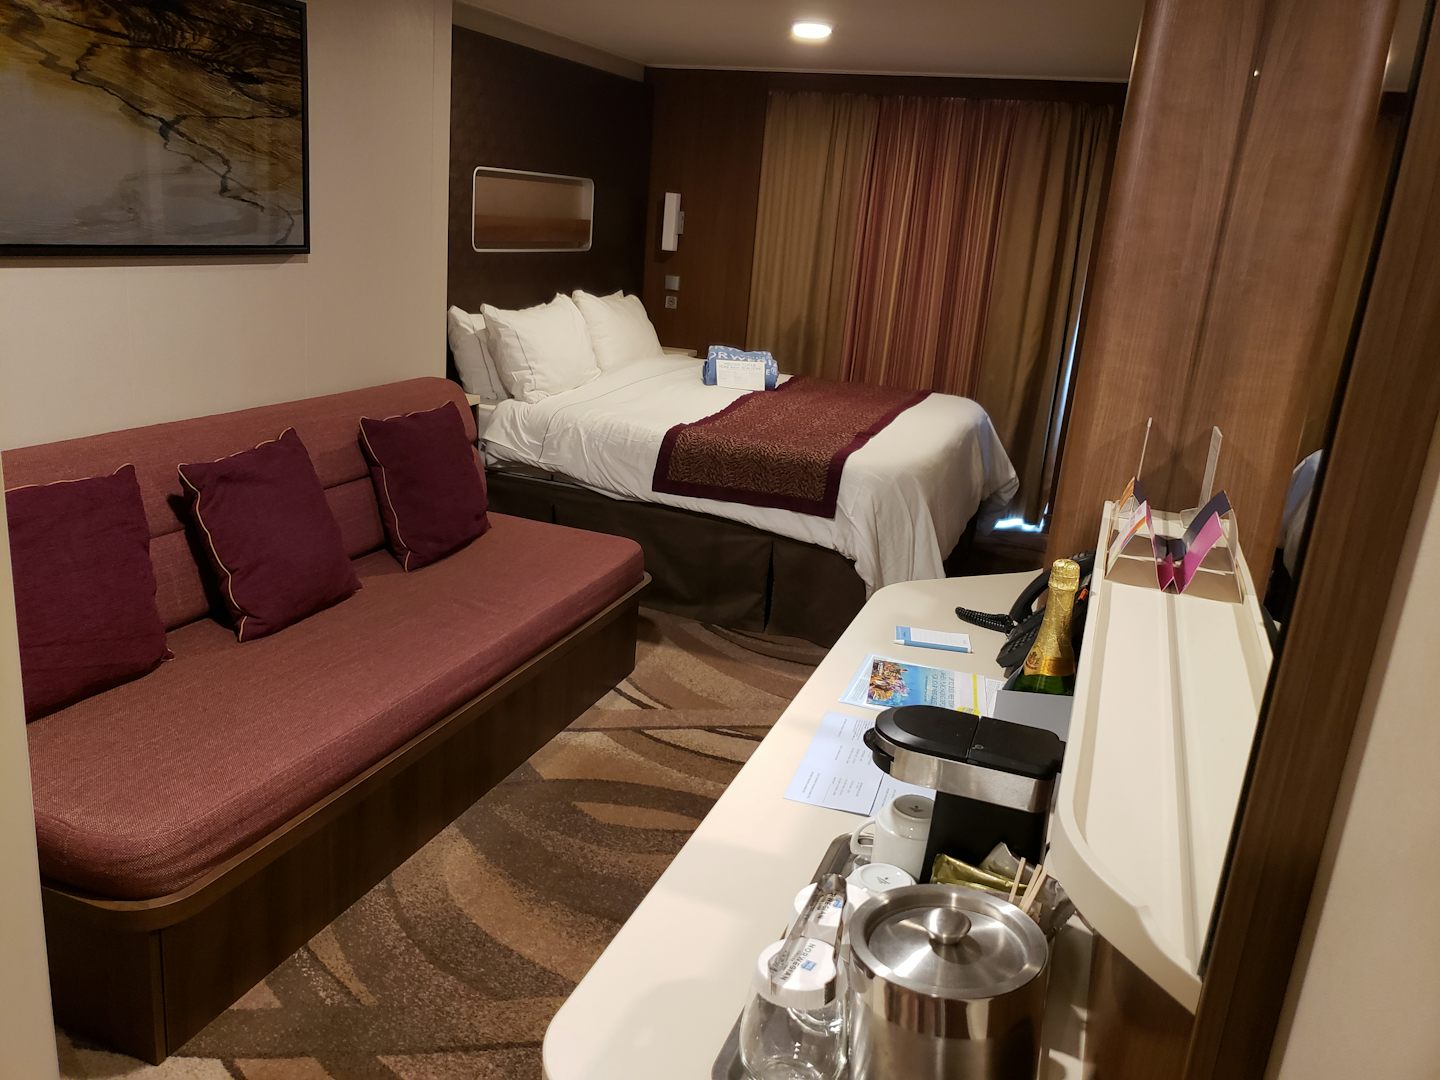 Mini-suite with bed near the balcony which gives more space for getting rea